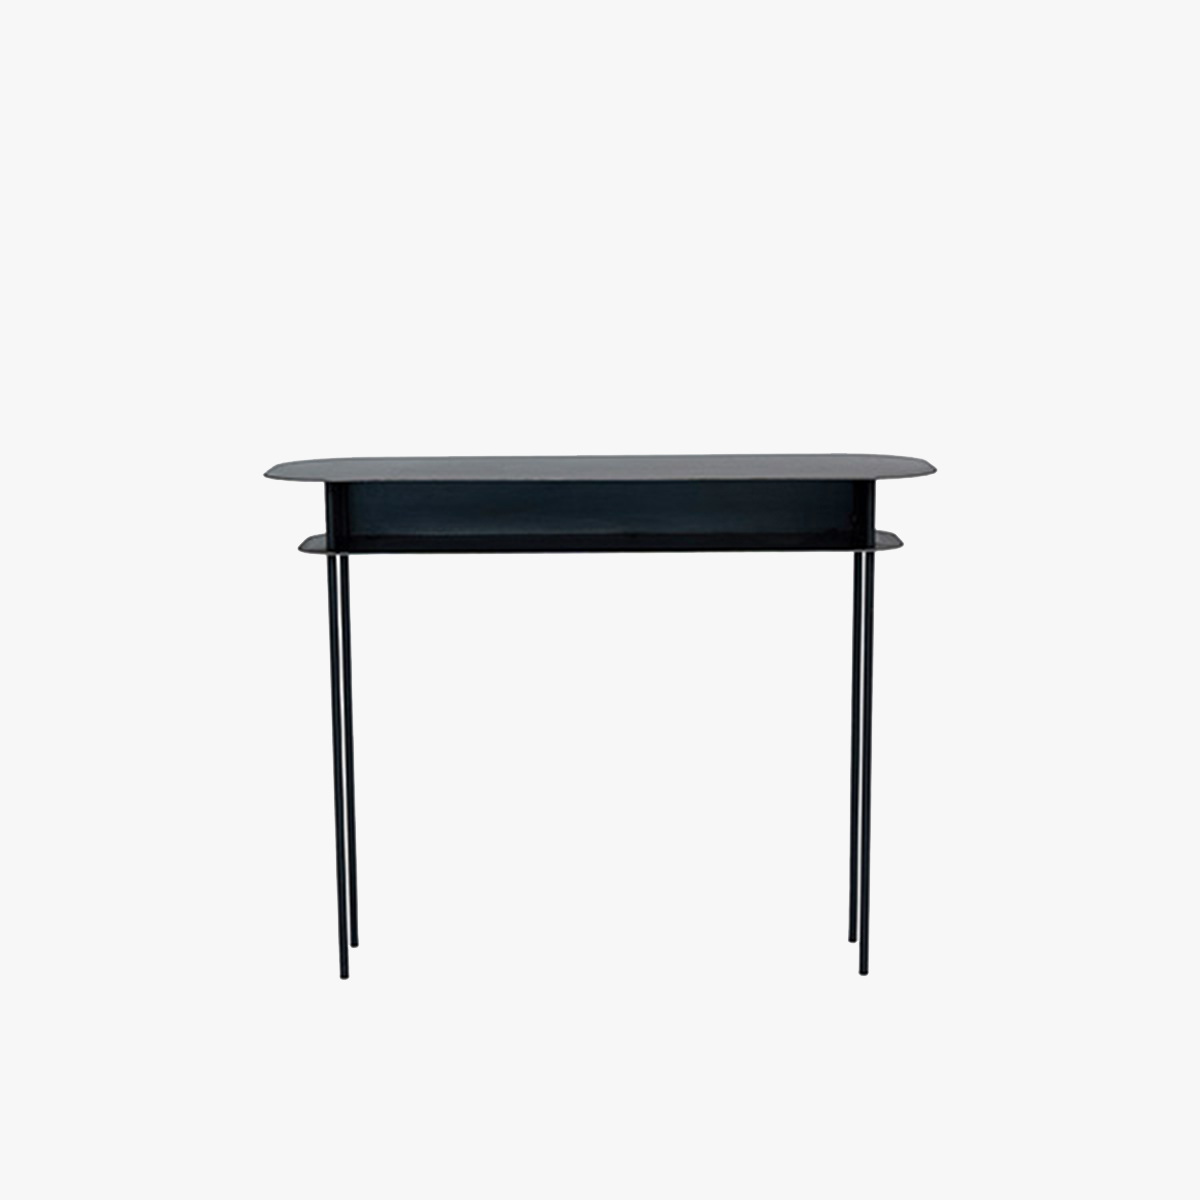 Console Table Tokyo, Steel - Different sizes - Powder coated steel - image 1